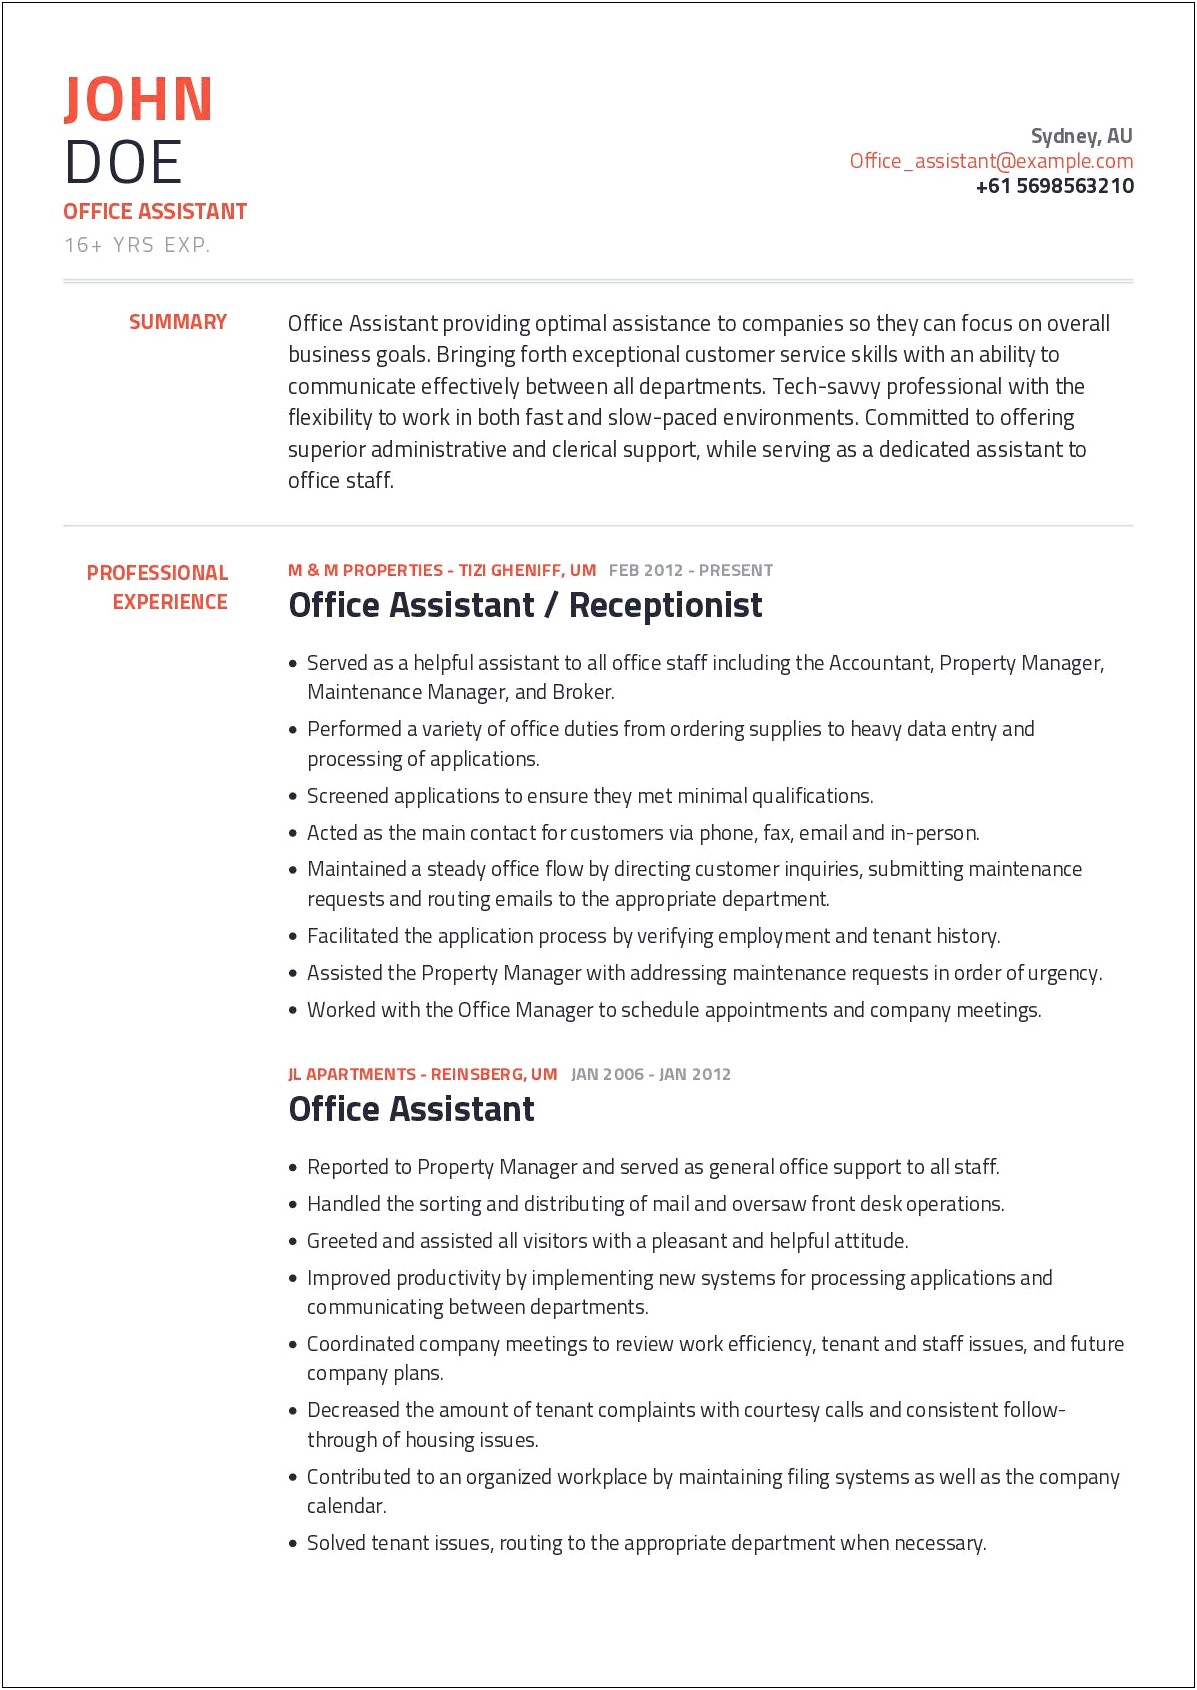 Resume Profile Samples For Admin Assistant